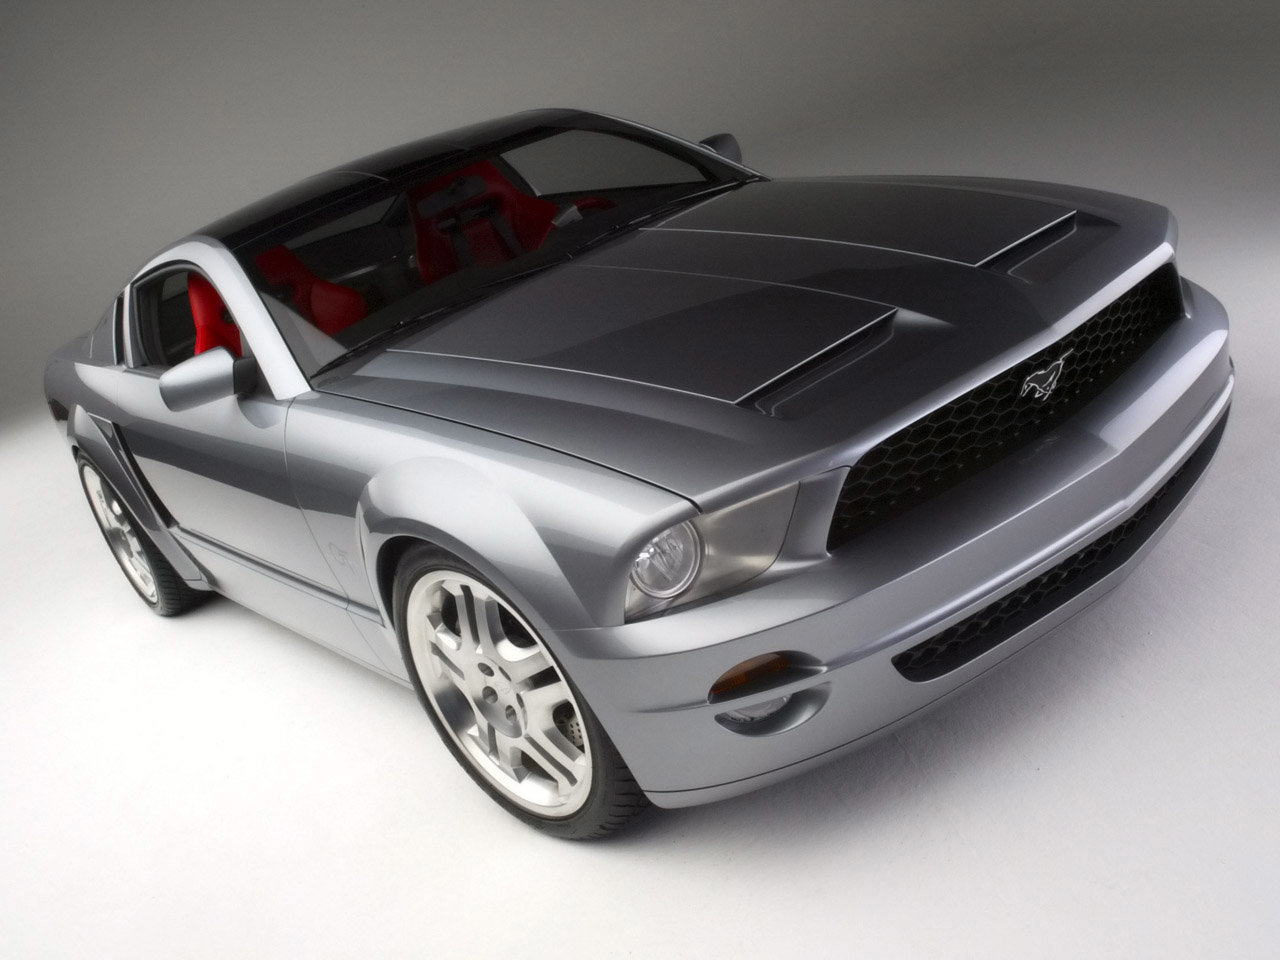 2005 Mustang Concept